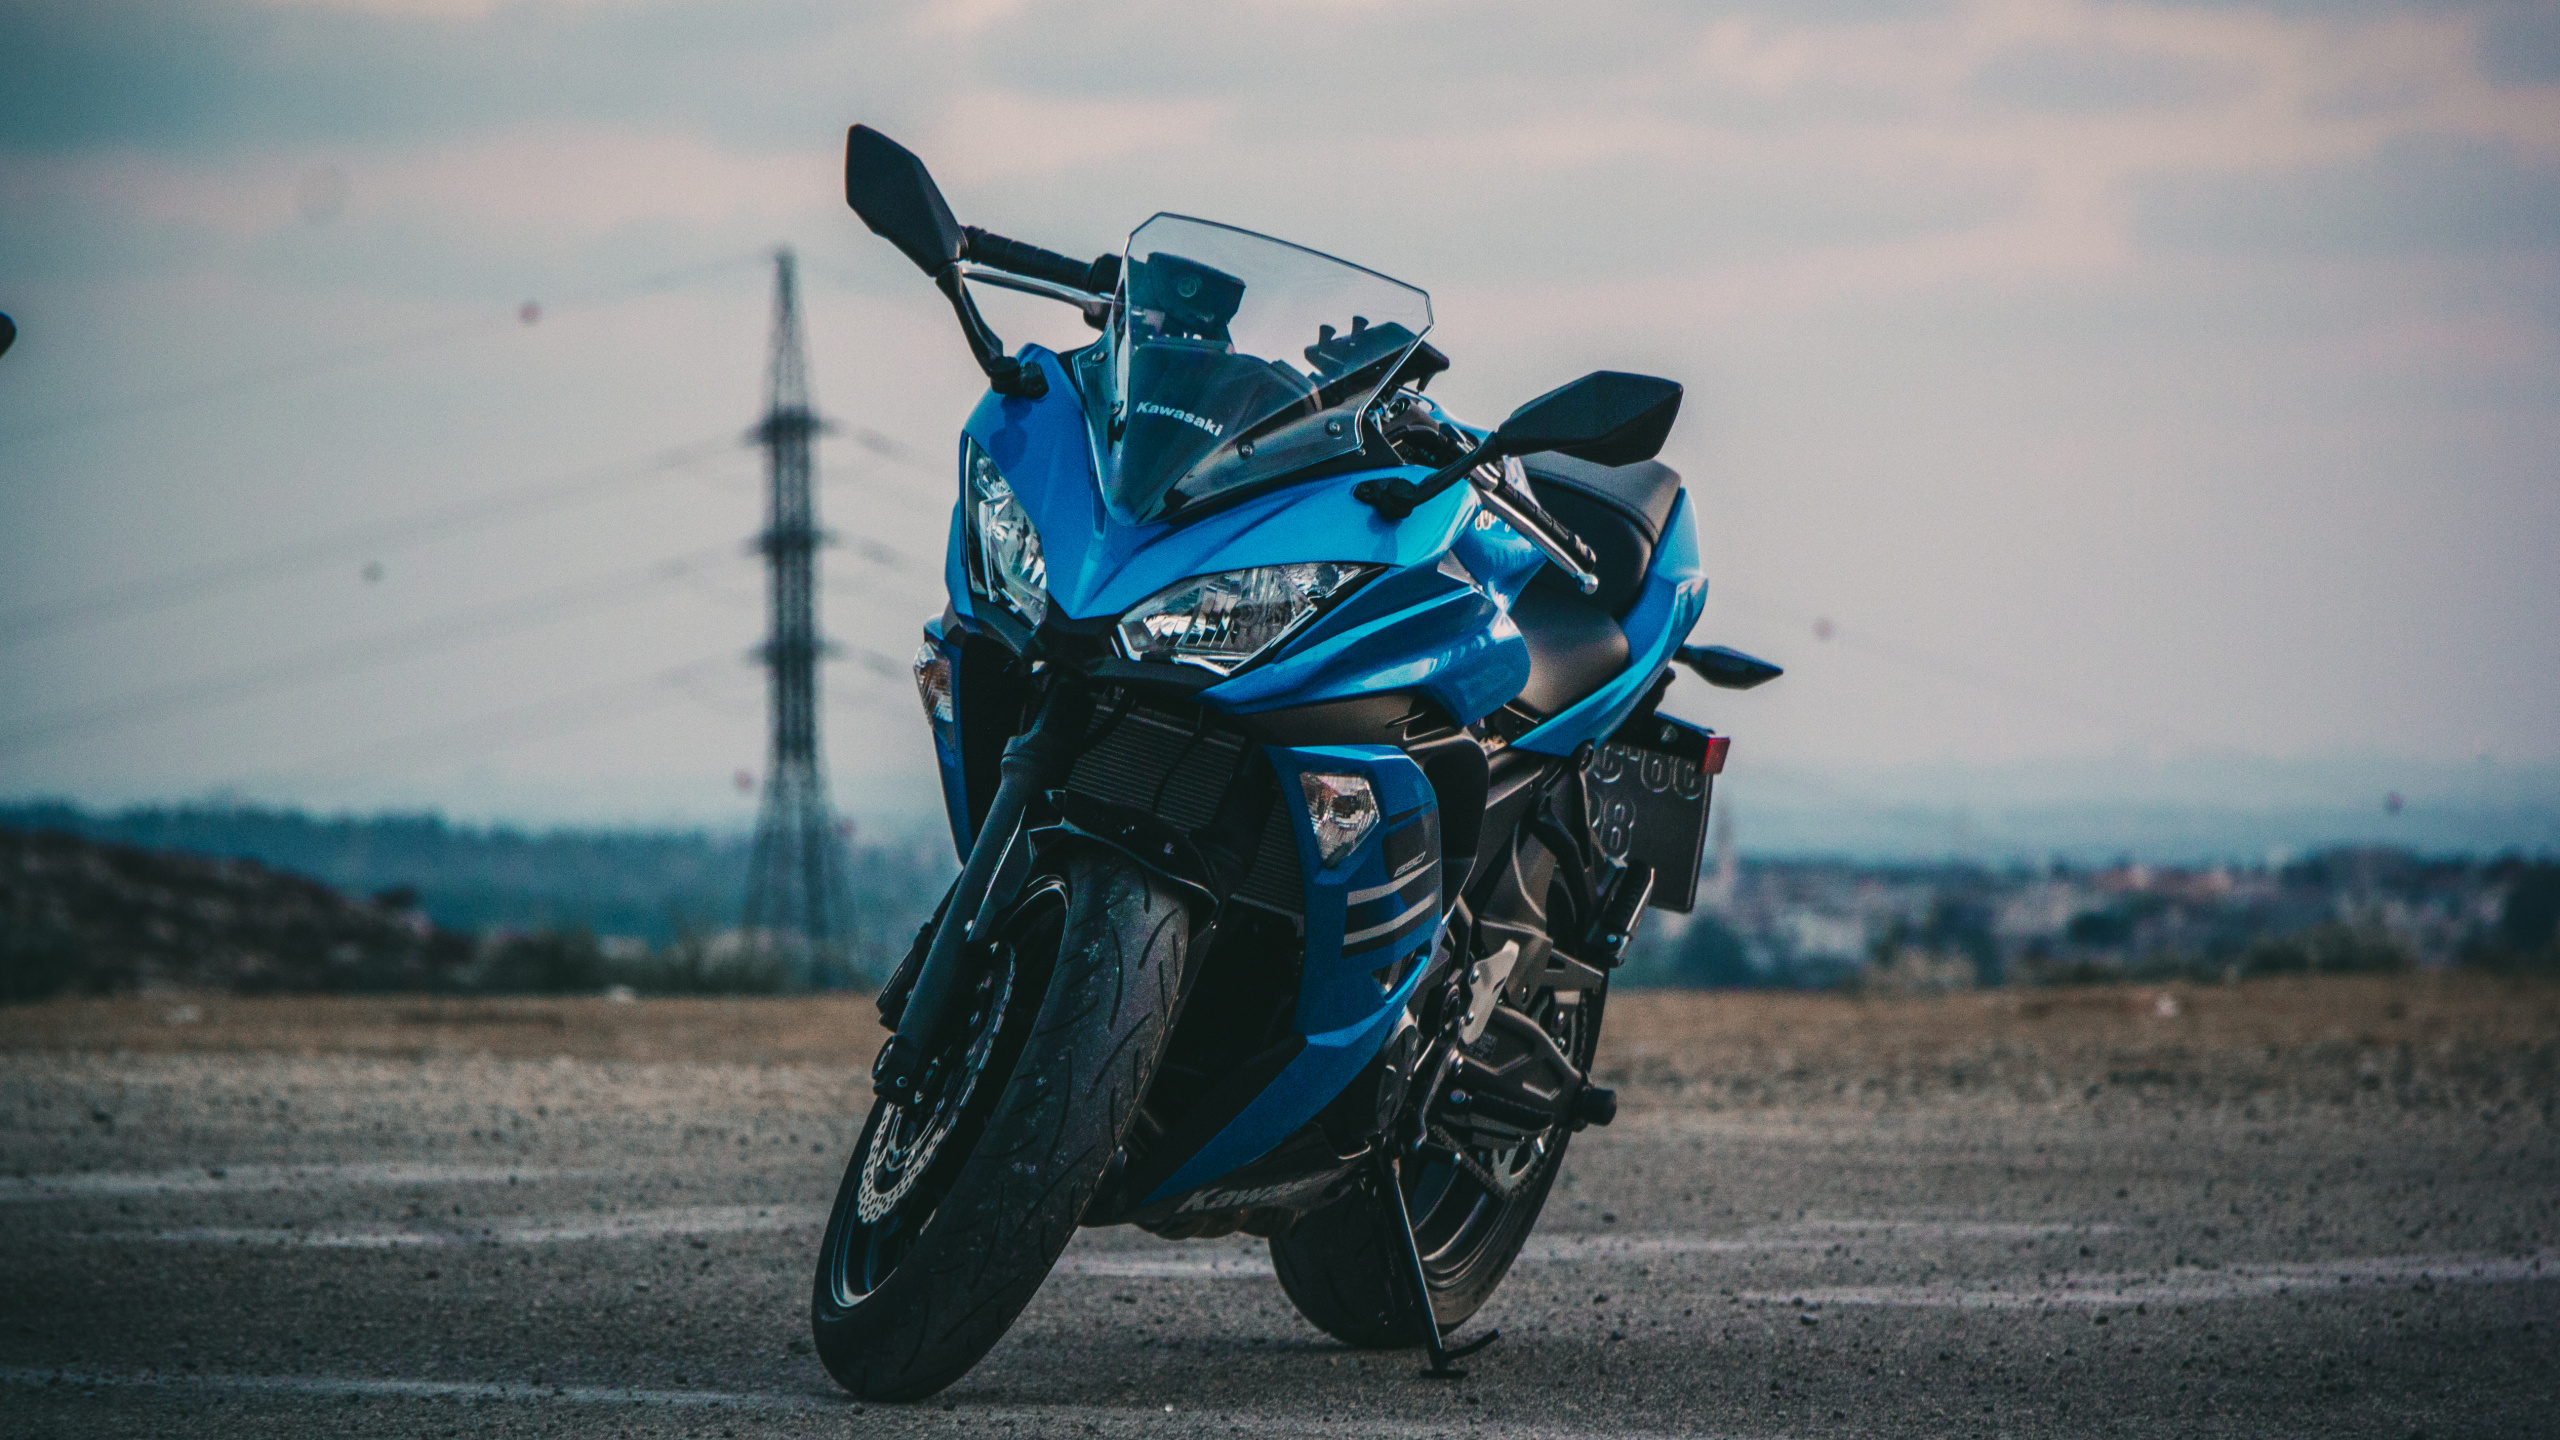 Blue and Black Sports Bike on Gray Asphalt Road During Daytime. Wallpaper in 2560x1440 Resolution